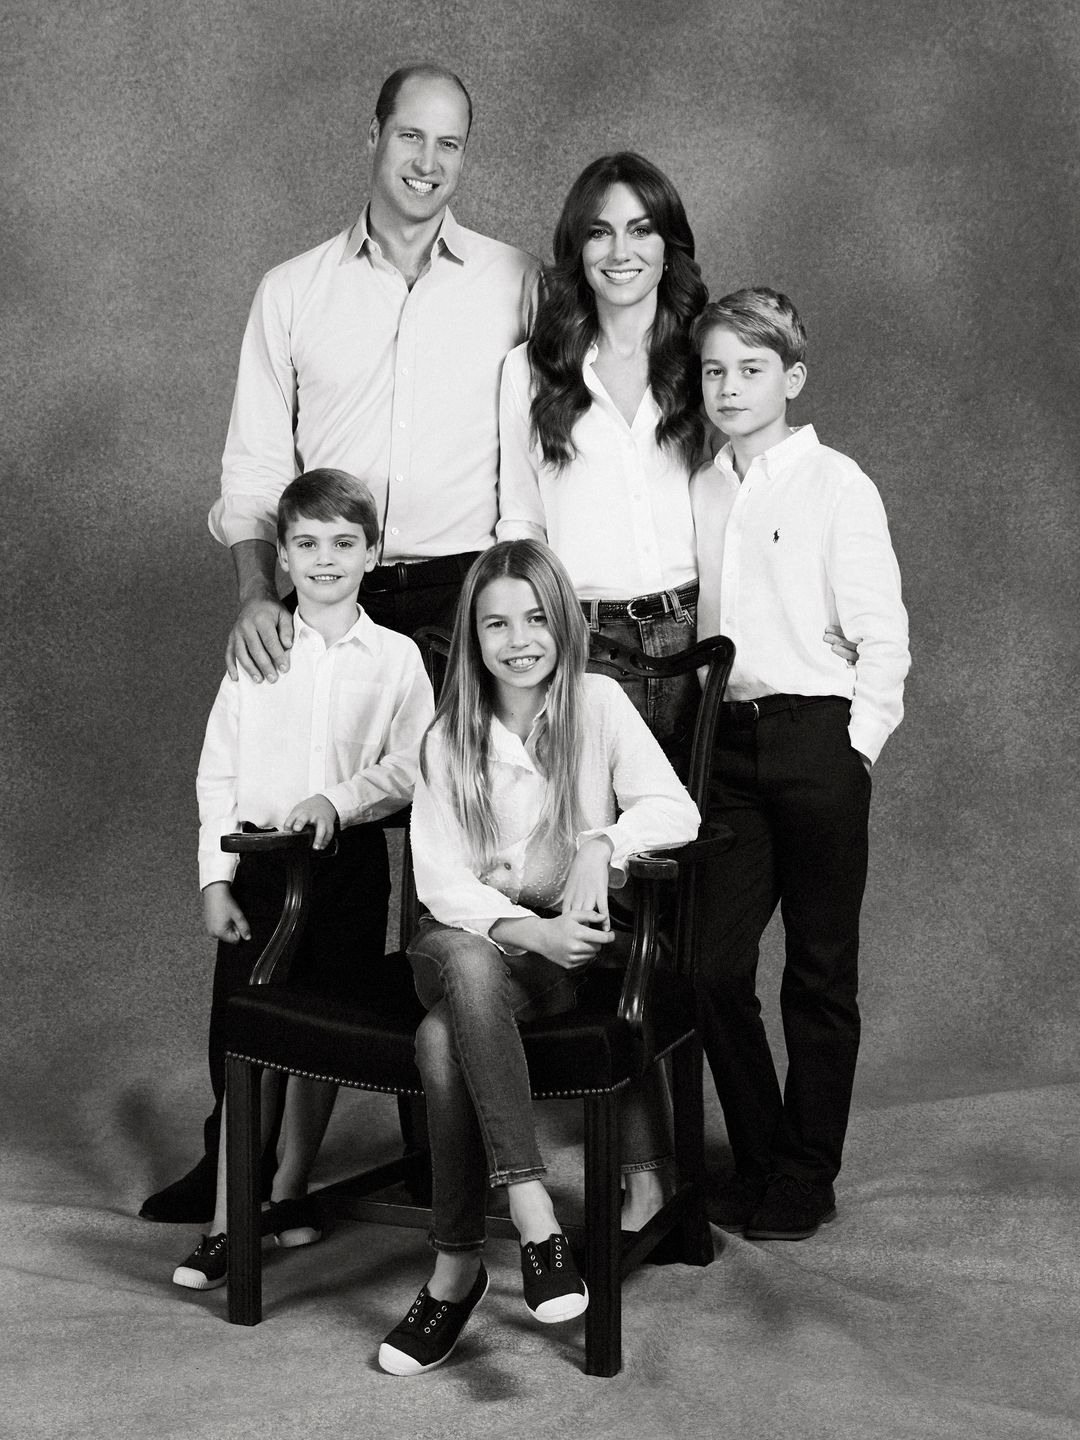 Black and white portrait of the Prince and Princess of Wales and their children for their 2023 Christmas card photo